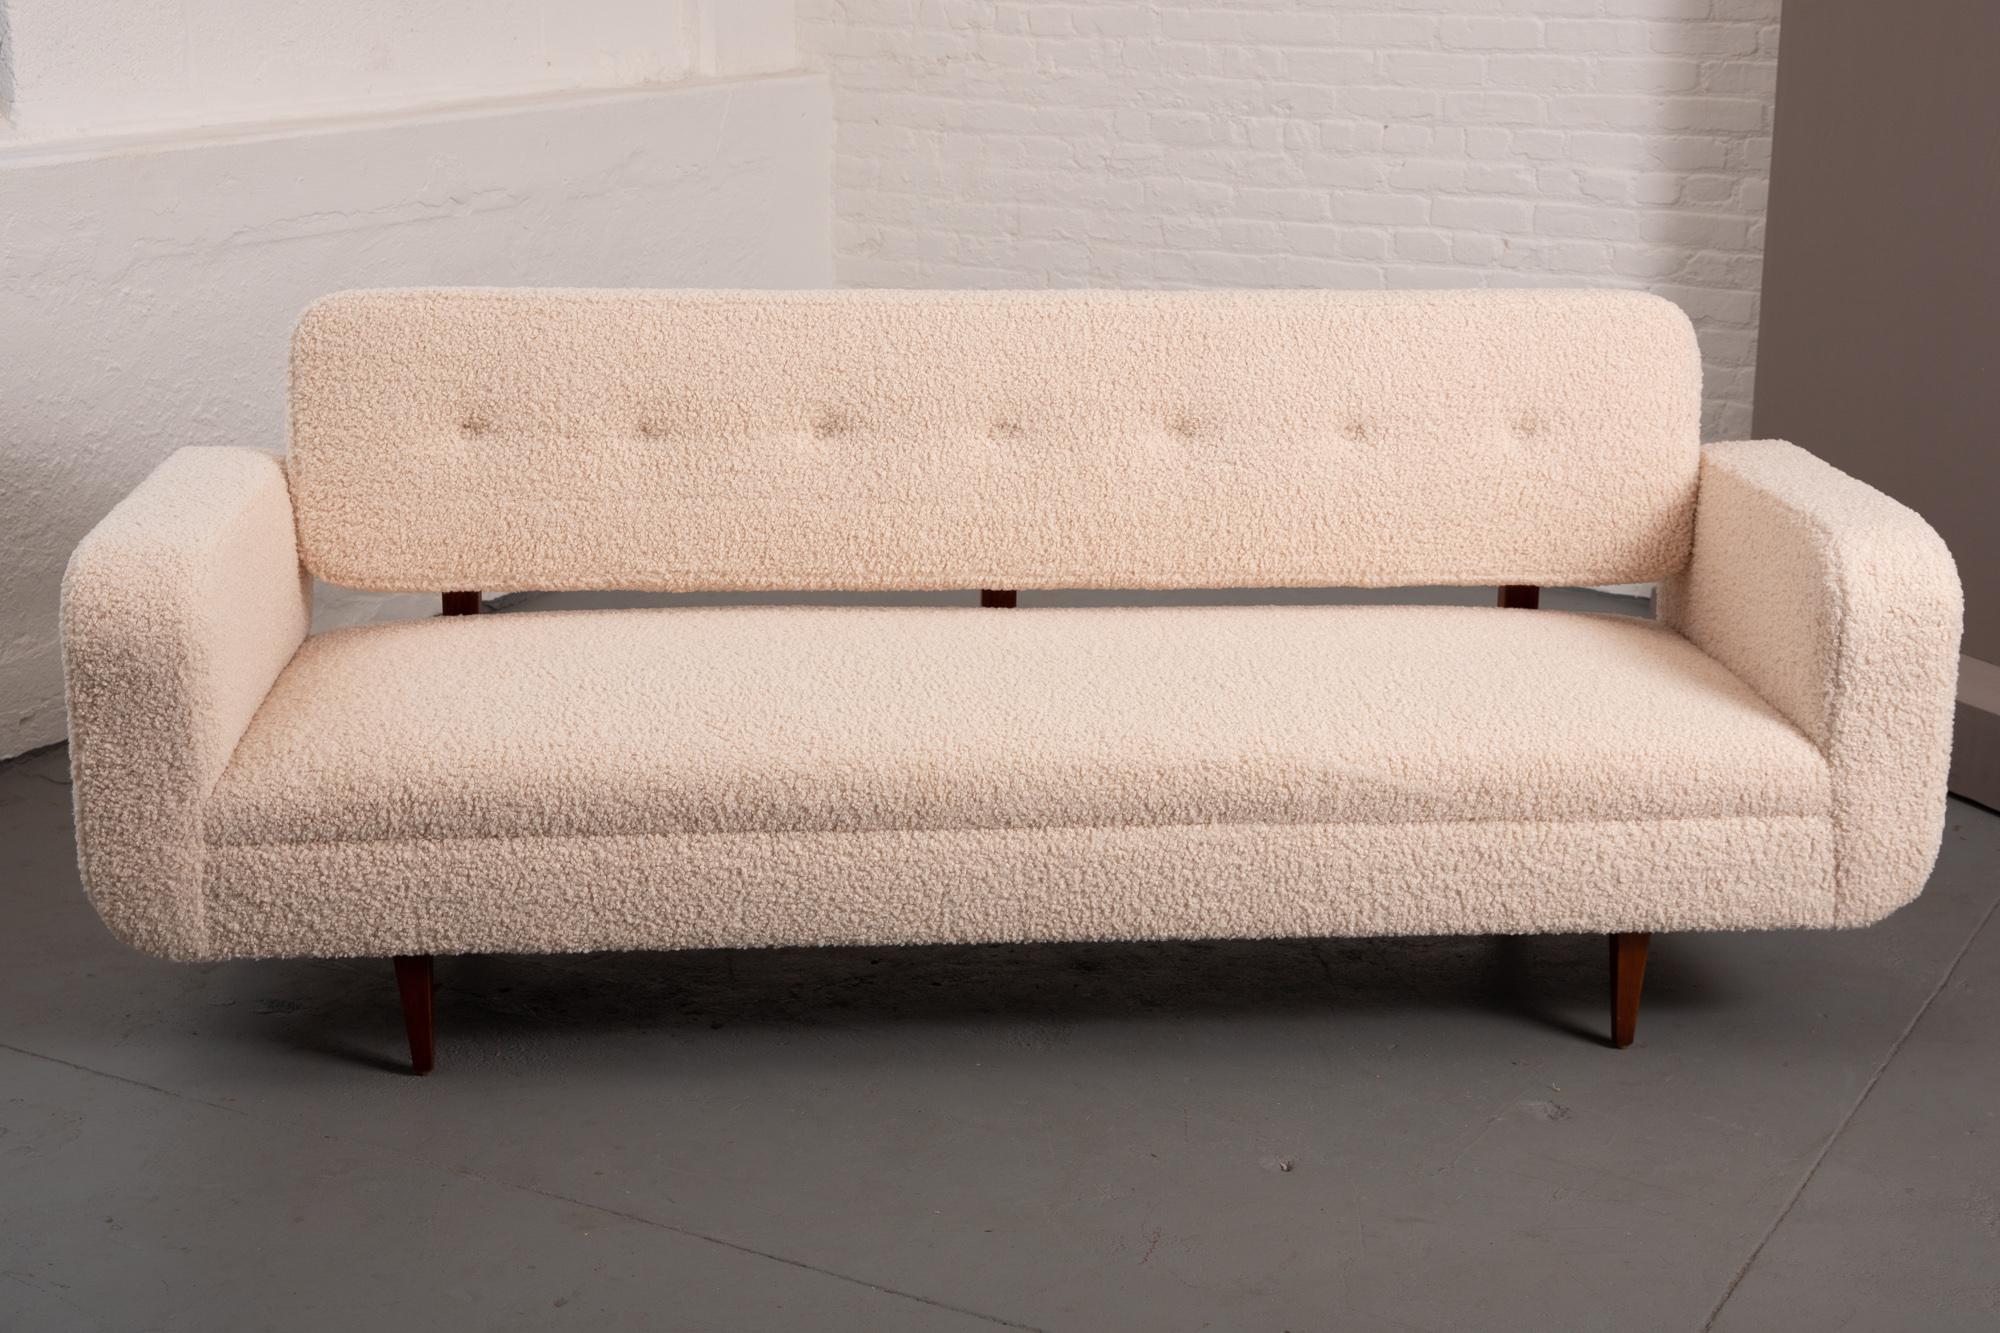 Mid-Century Modern sofa newly upholstered in natural/ivory boucle. Button tufting to the seat back. Sculptural wood upright detail to rear of sofa. Rounded arms and seat back.
Measures: Seat depth - 19